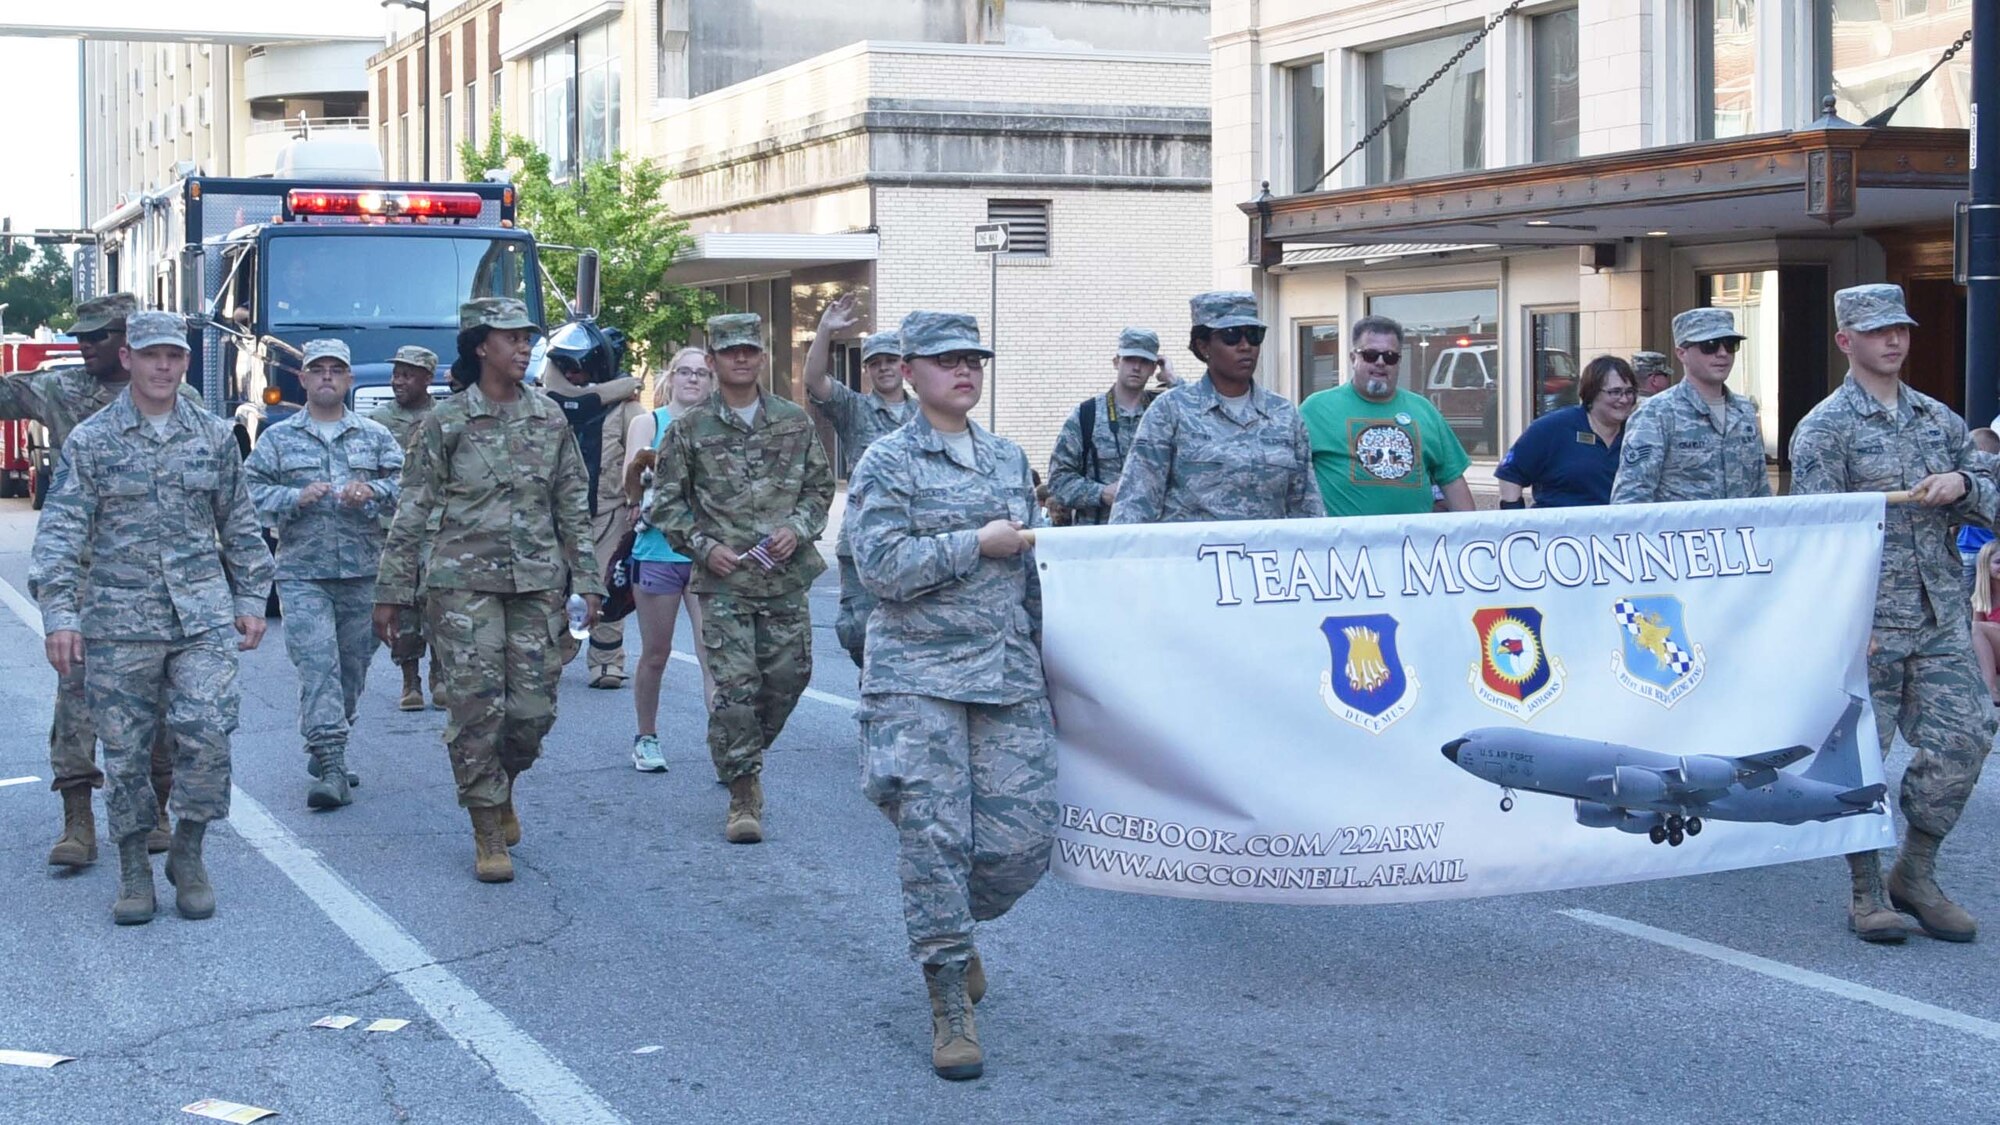 Airmen from Team McConnell participated in the Sundown Parade to help kick off Wichita's 2019 Riverfest celebration, May 31, 2019, Wichita, Kan.